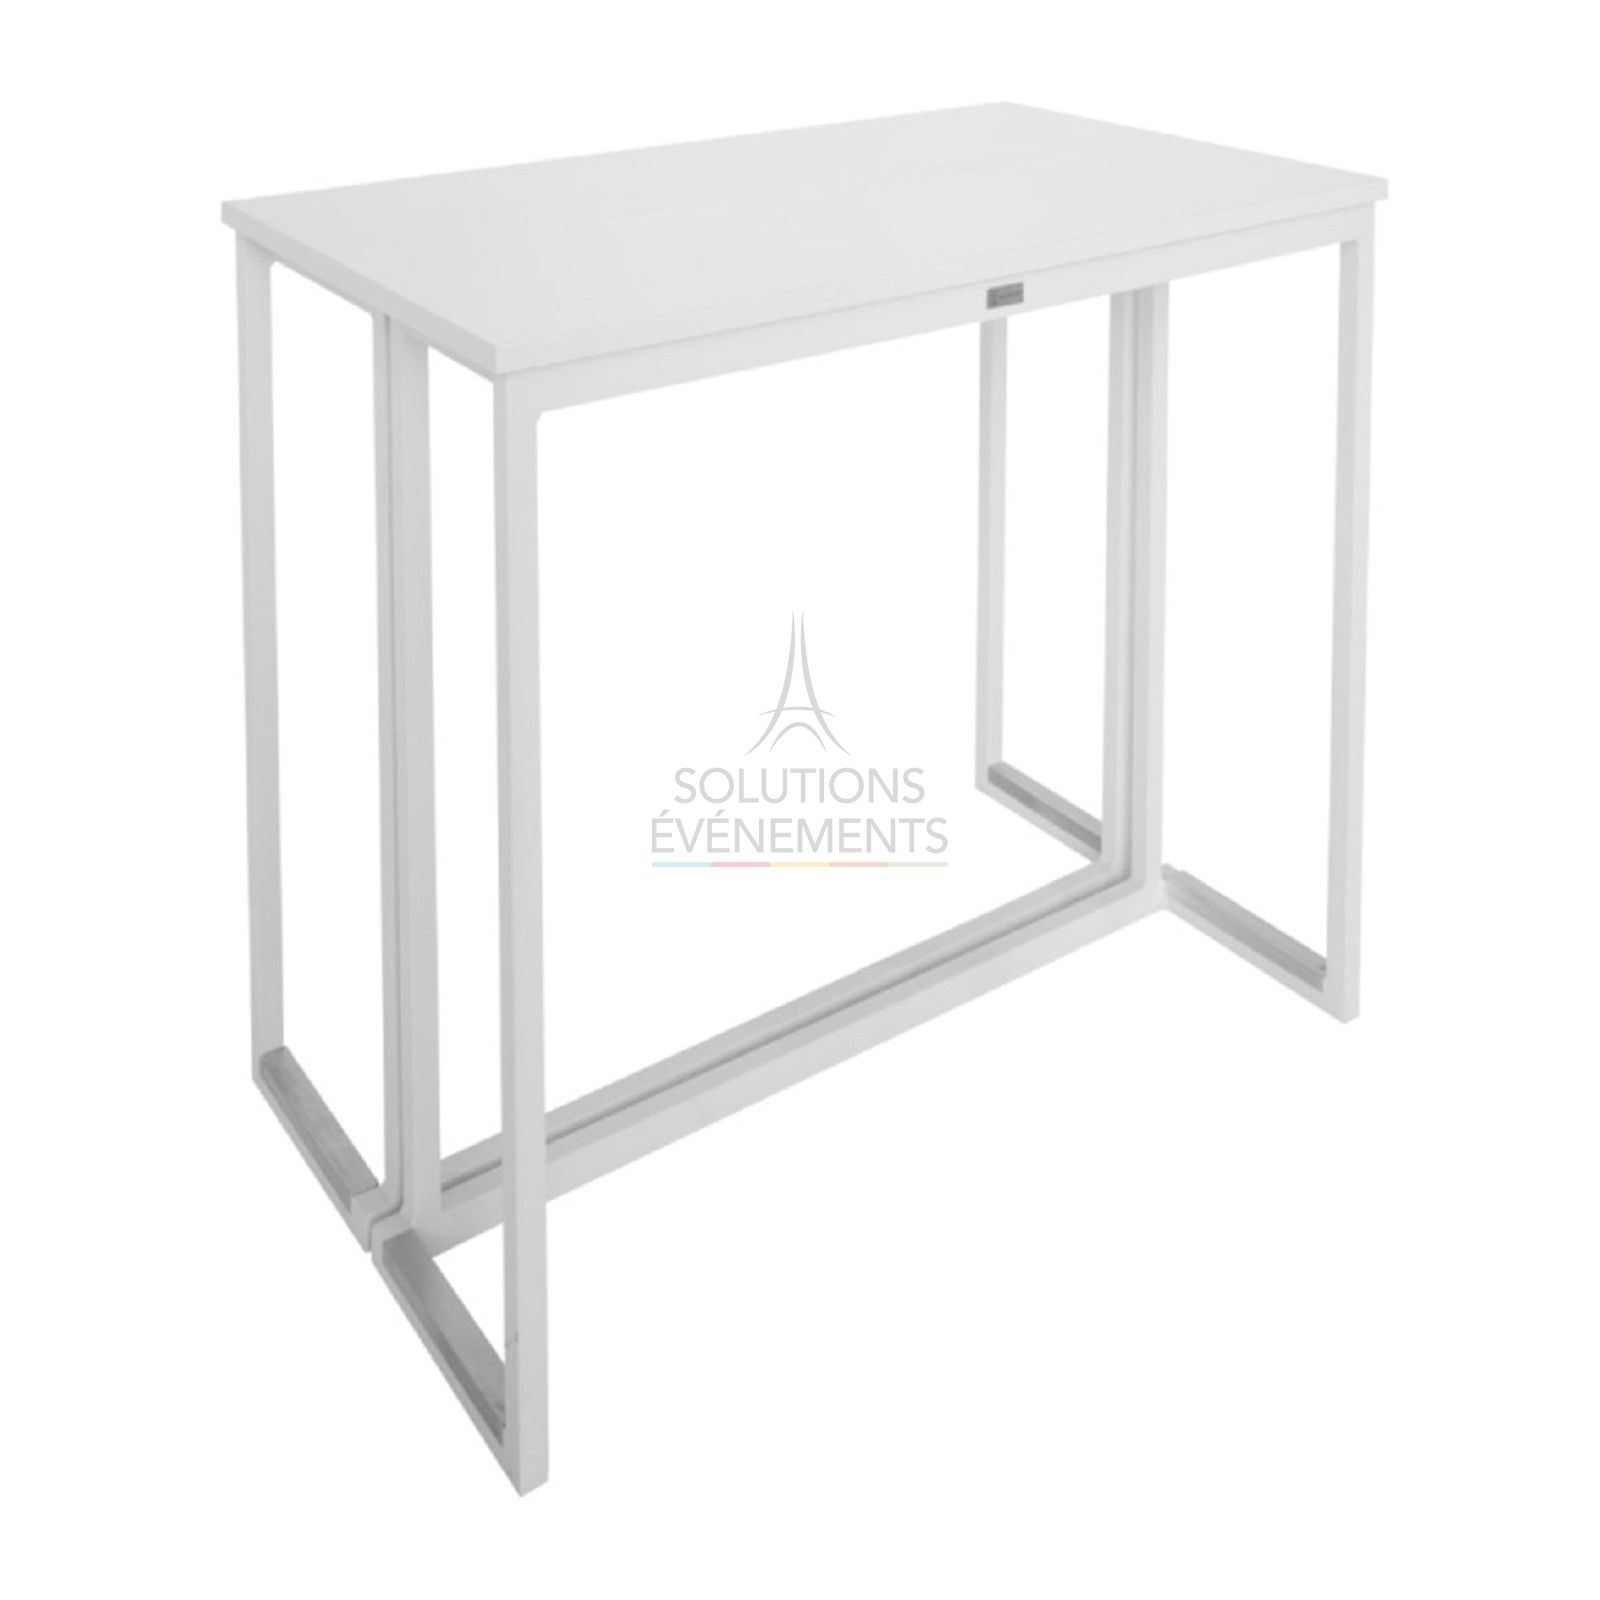 Rental of high table with modern design